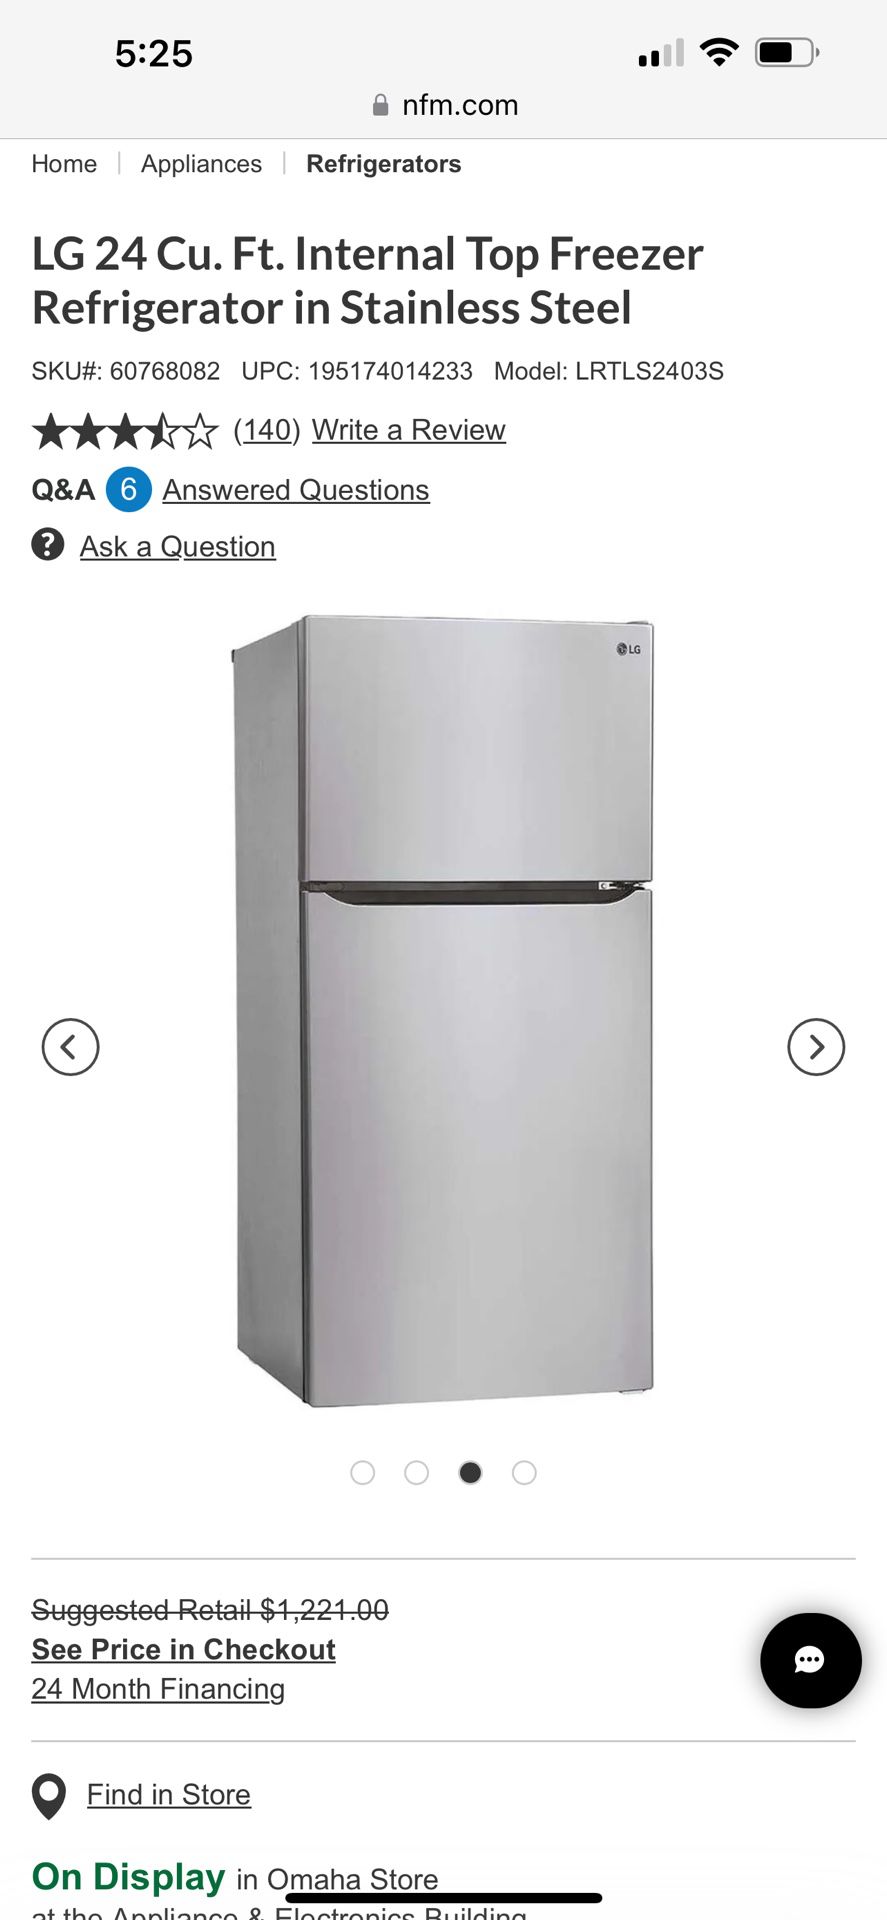 LG 24 Cu. Ft. Top Freezer Refrigerator in Stainless Steel